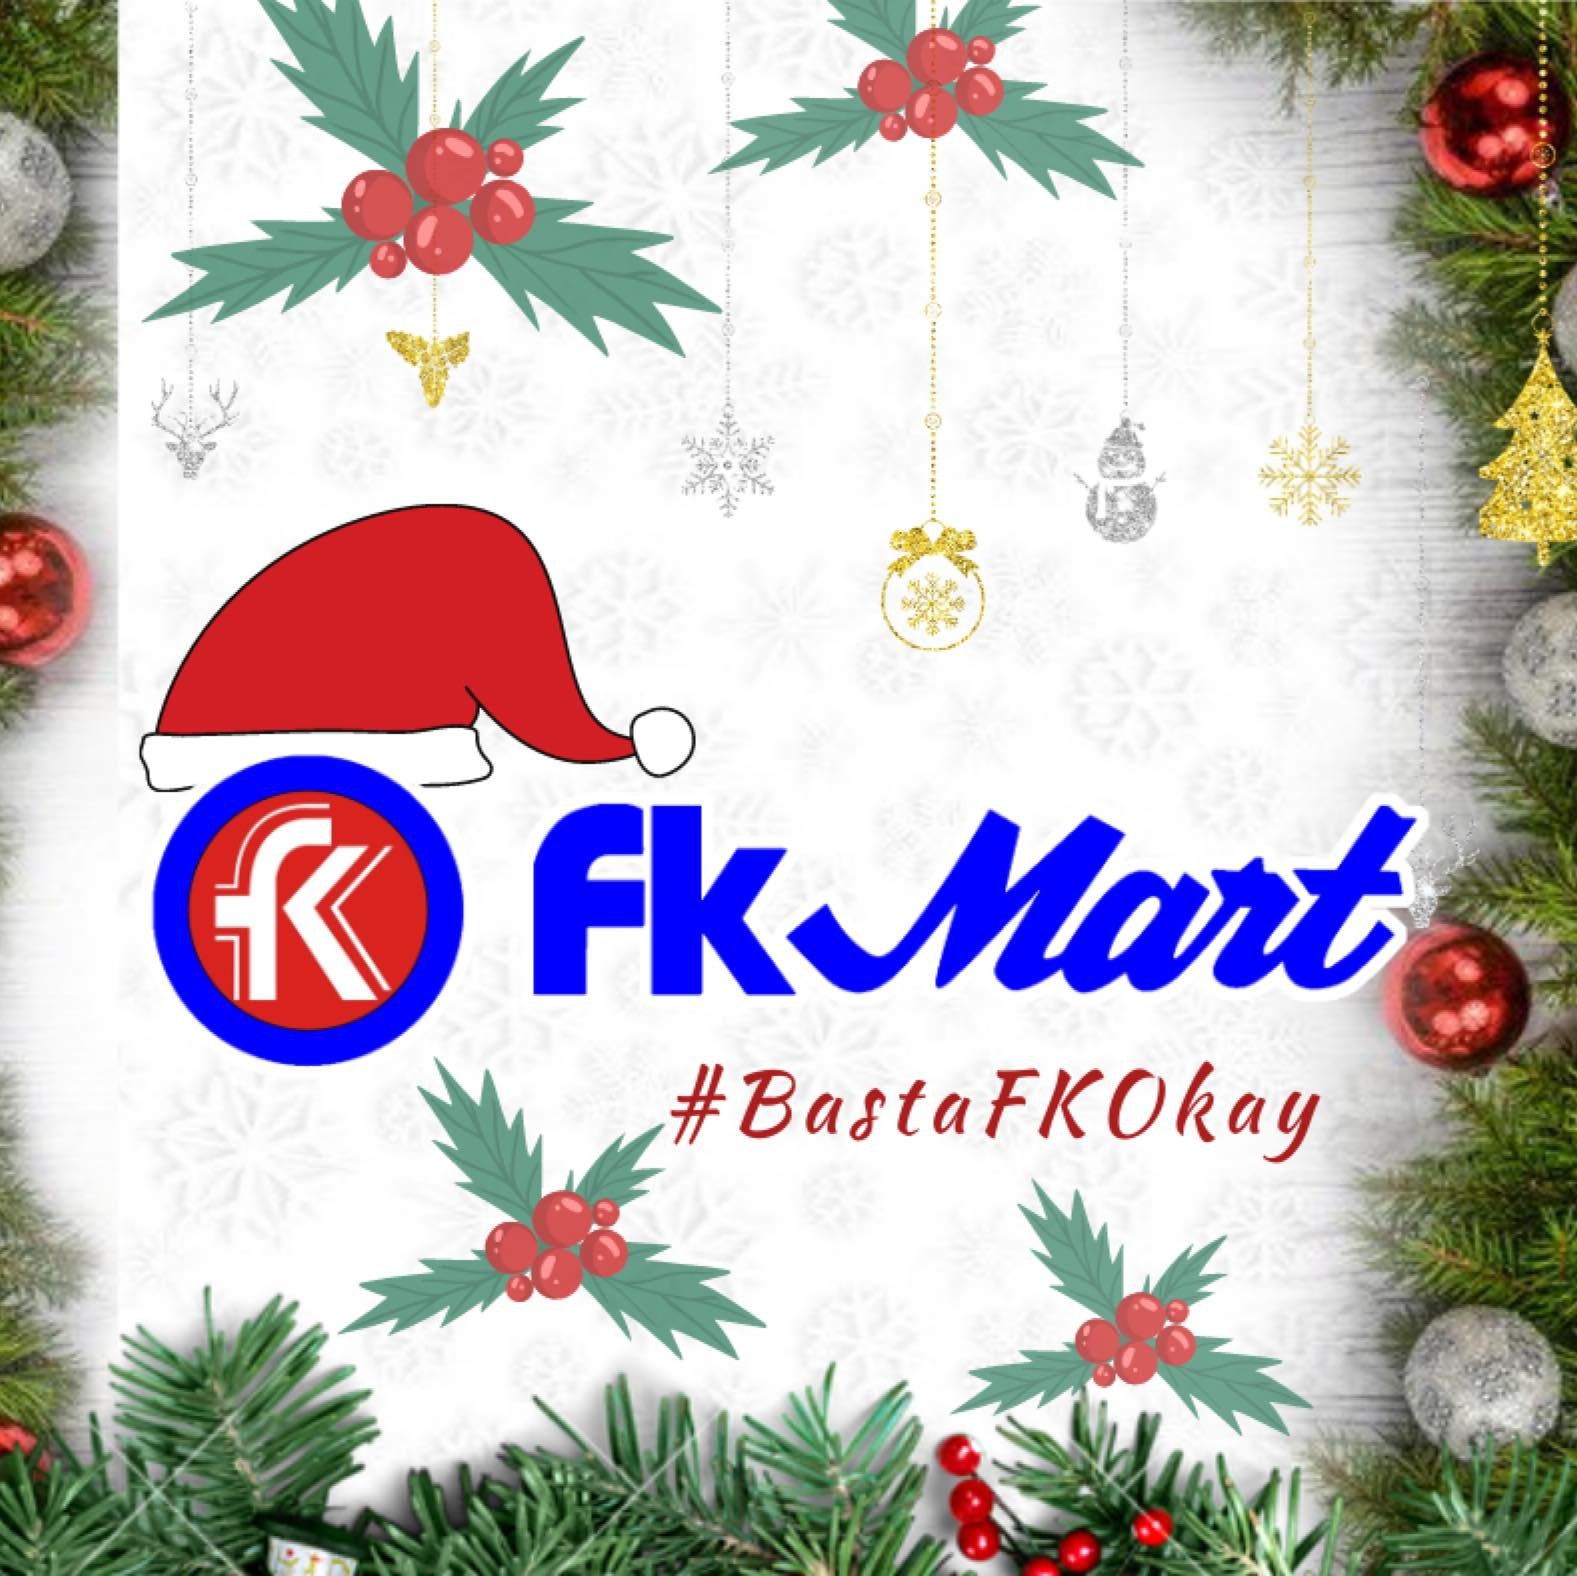 Grand opening of FK Supermarket and Pharmacy Iligan